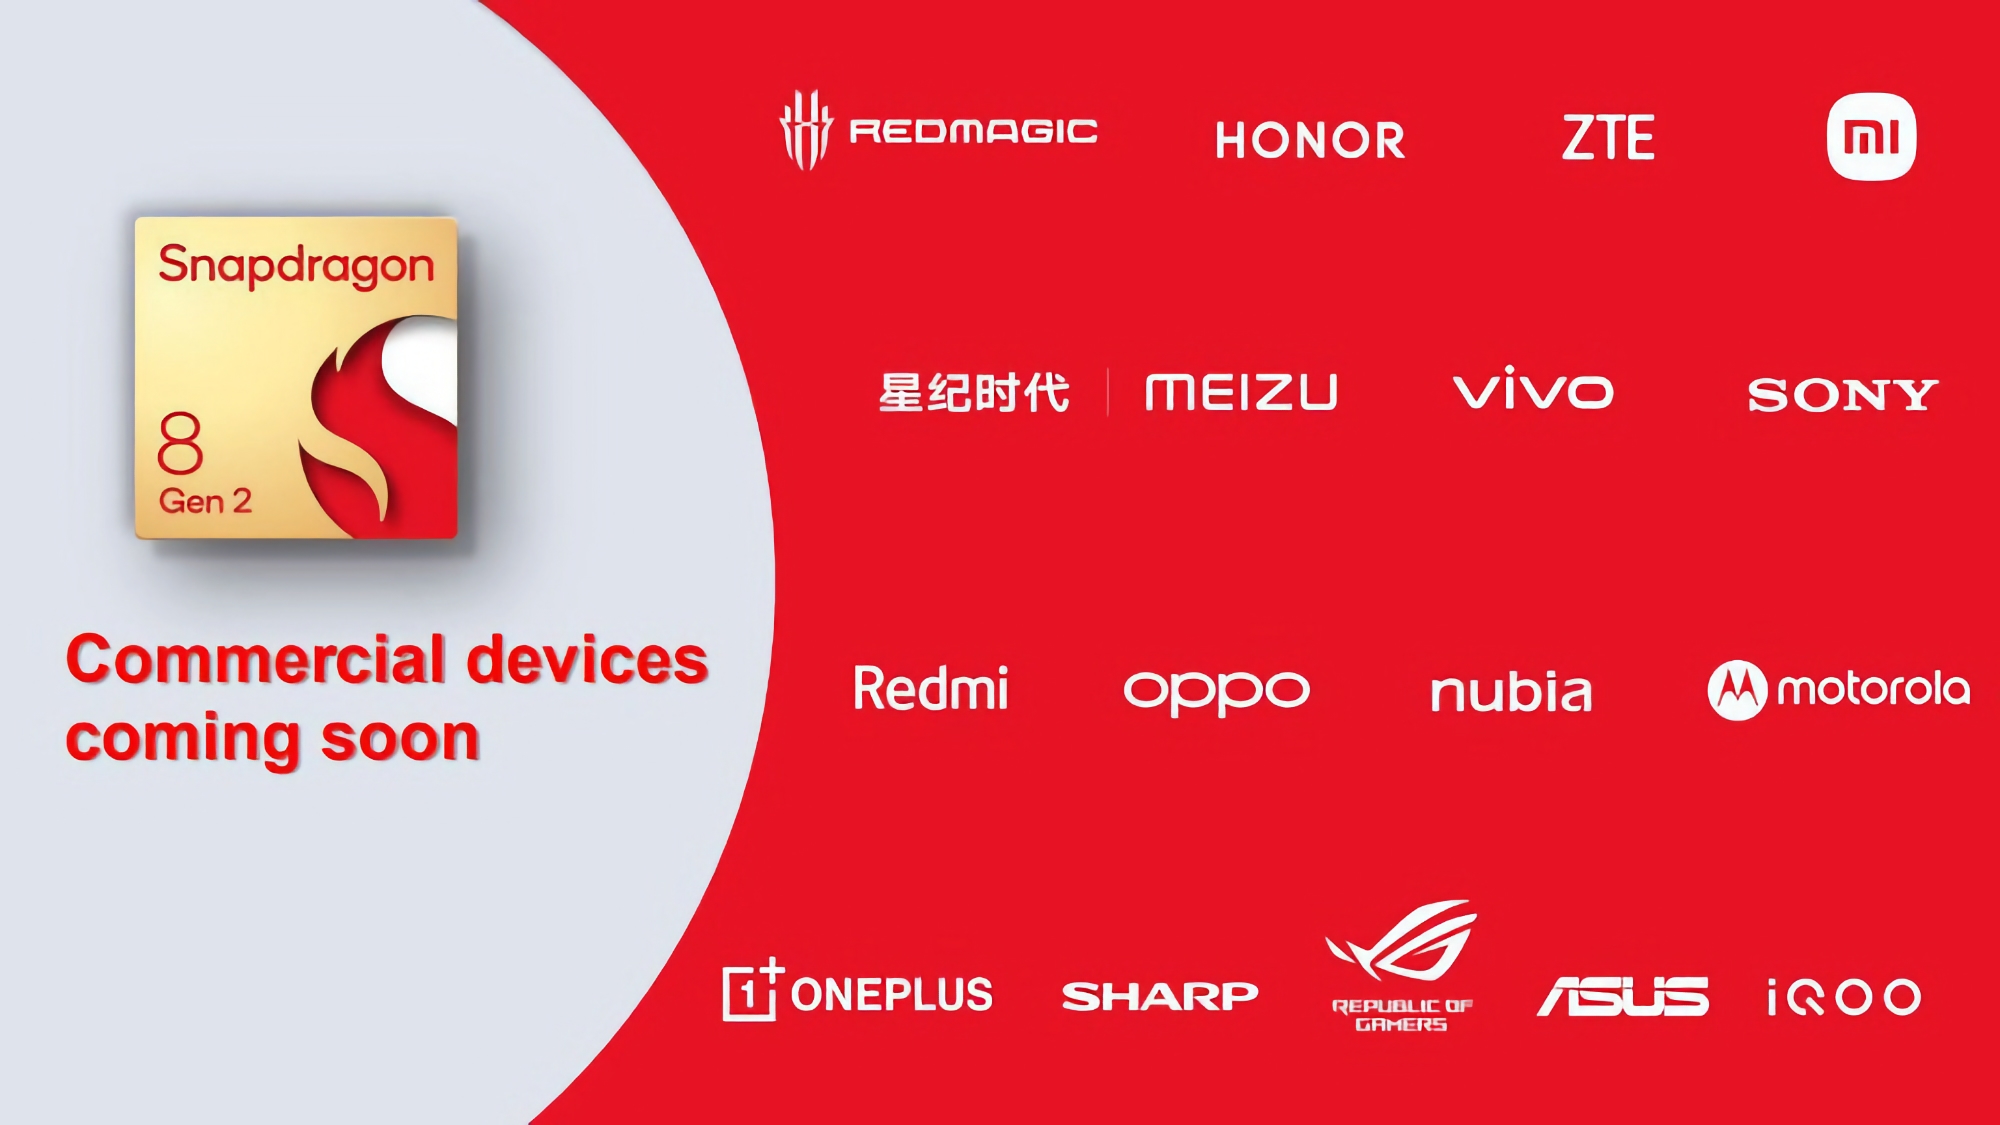 ASUS ROG, Honor, Sony, Motorola, ZTE, OnePlus, OPPO and others: the list of Android-smartphone manufacturers that will use the new Snapdragon 8 Gen 2 chip